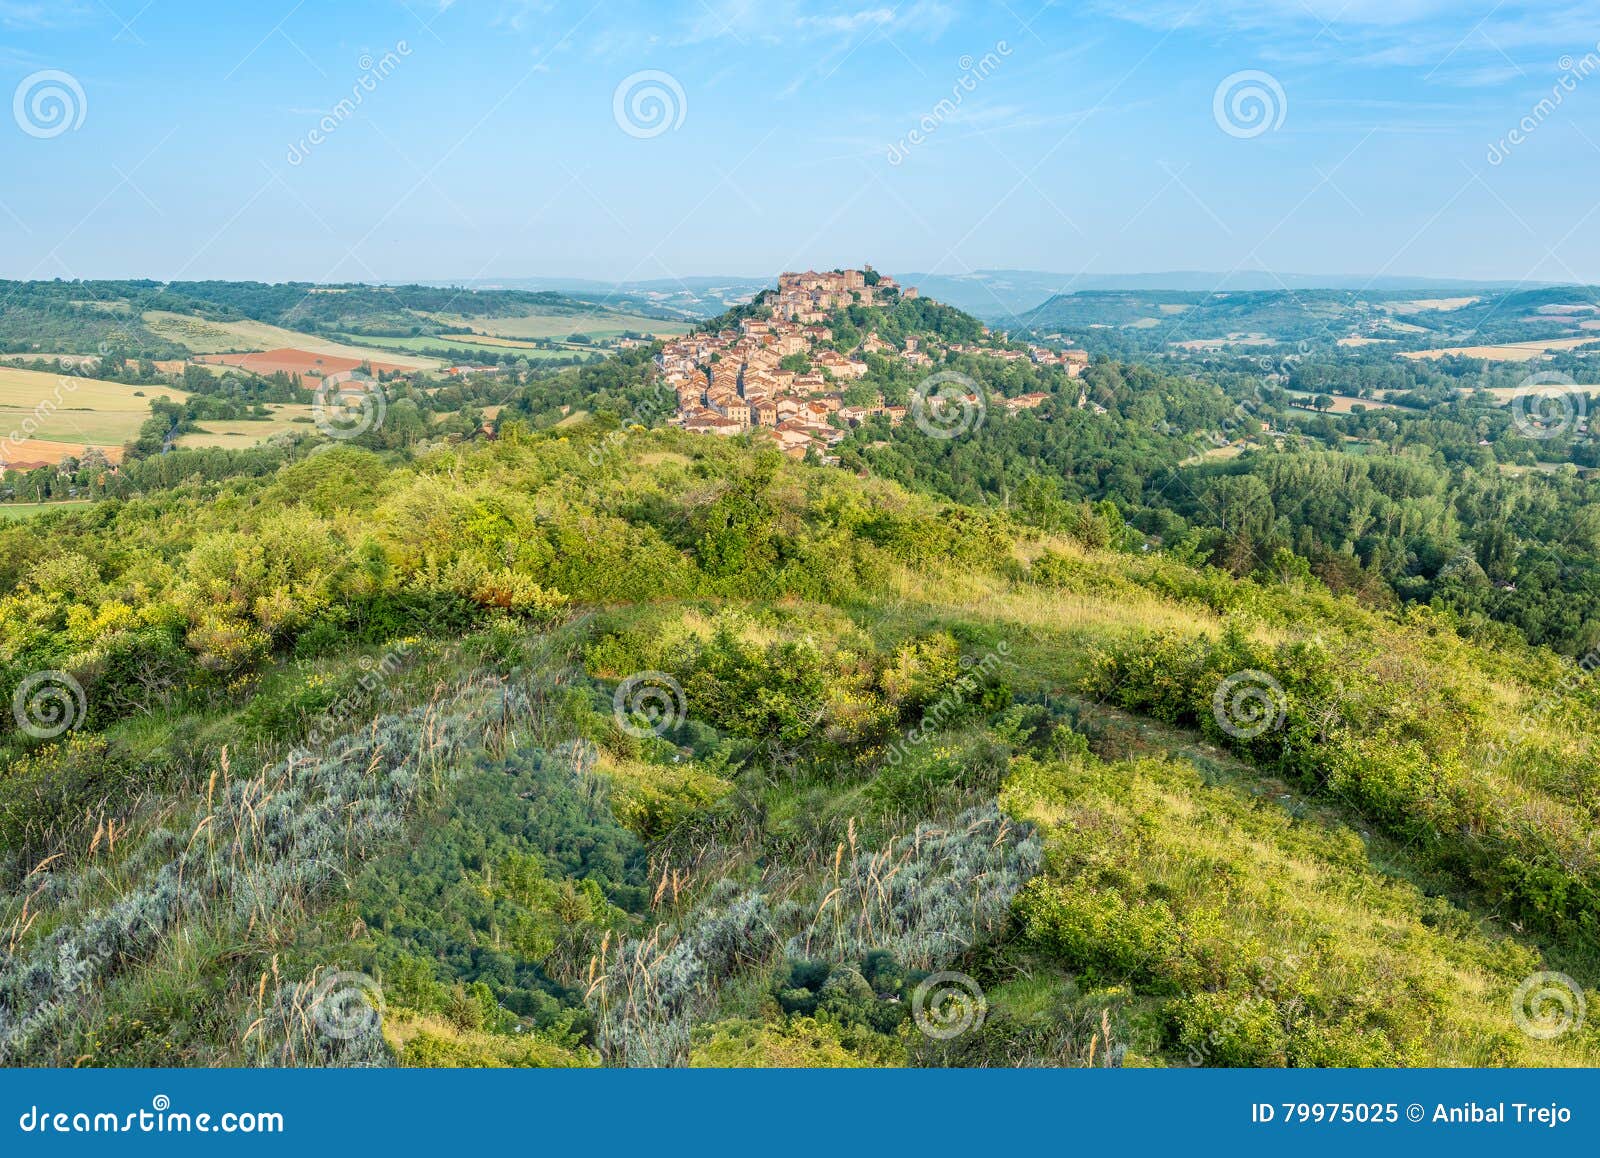 cordes-sur-ciel, france from eastern viewpoint